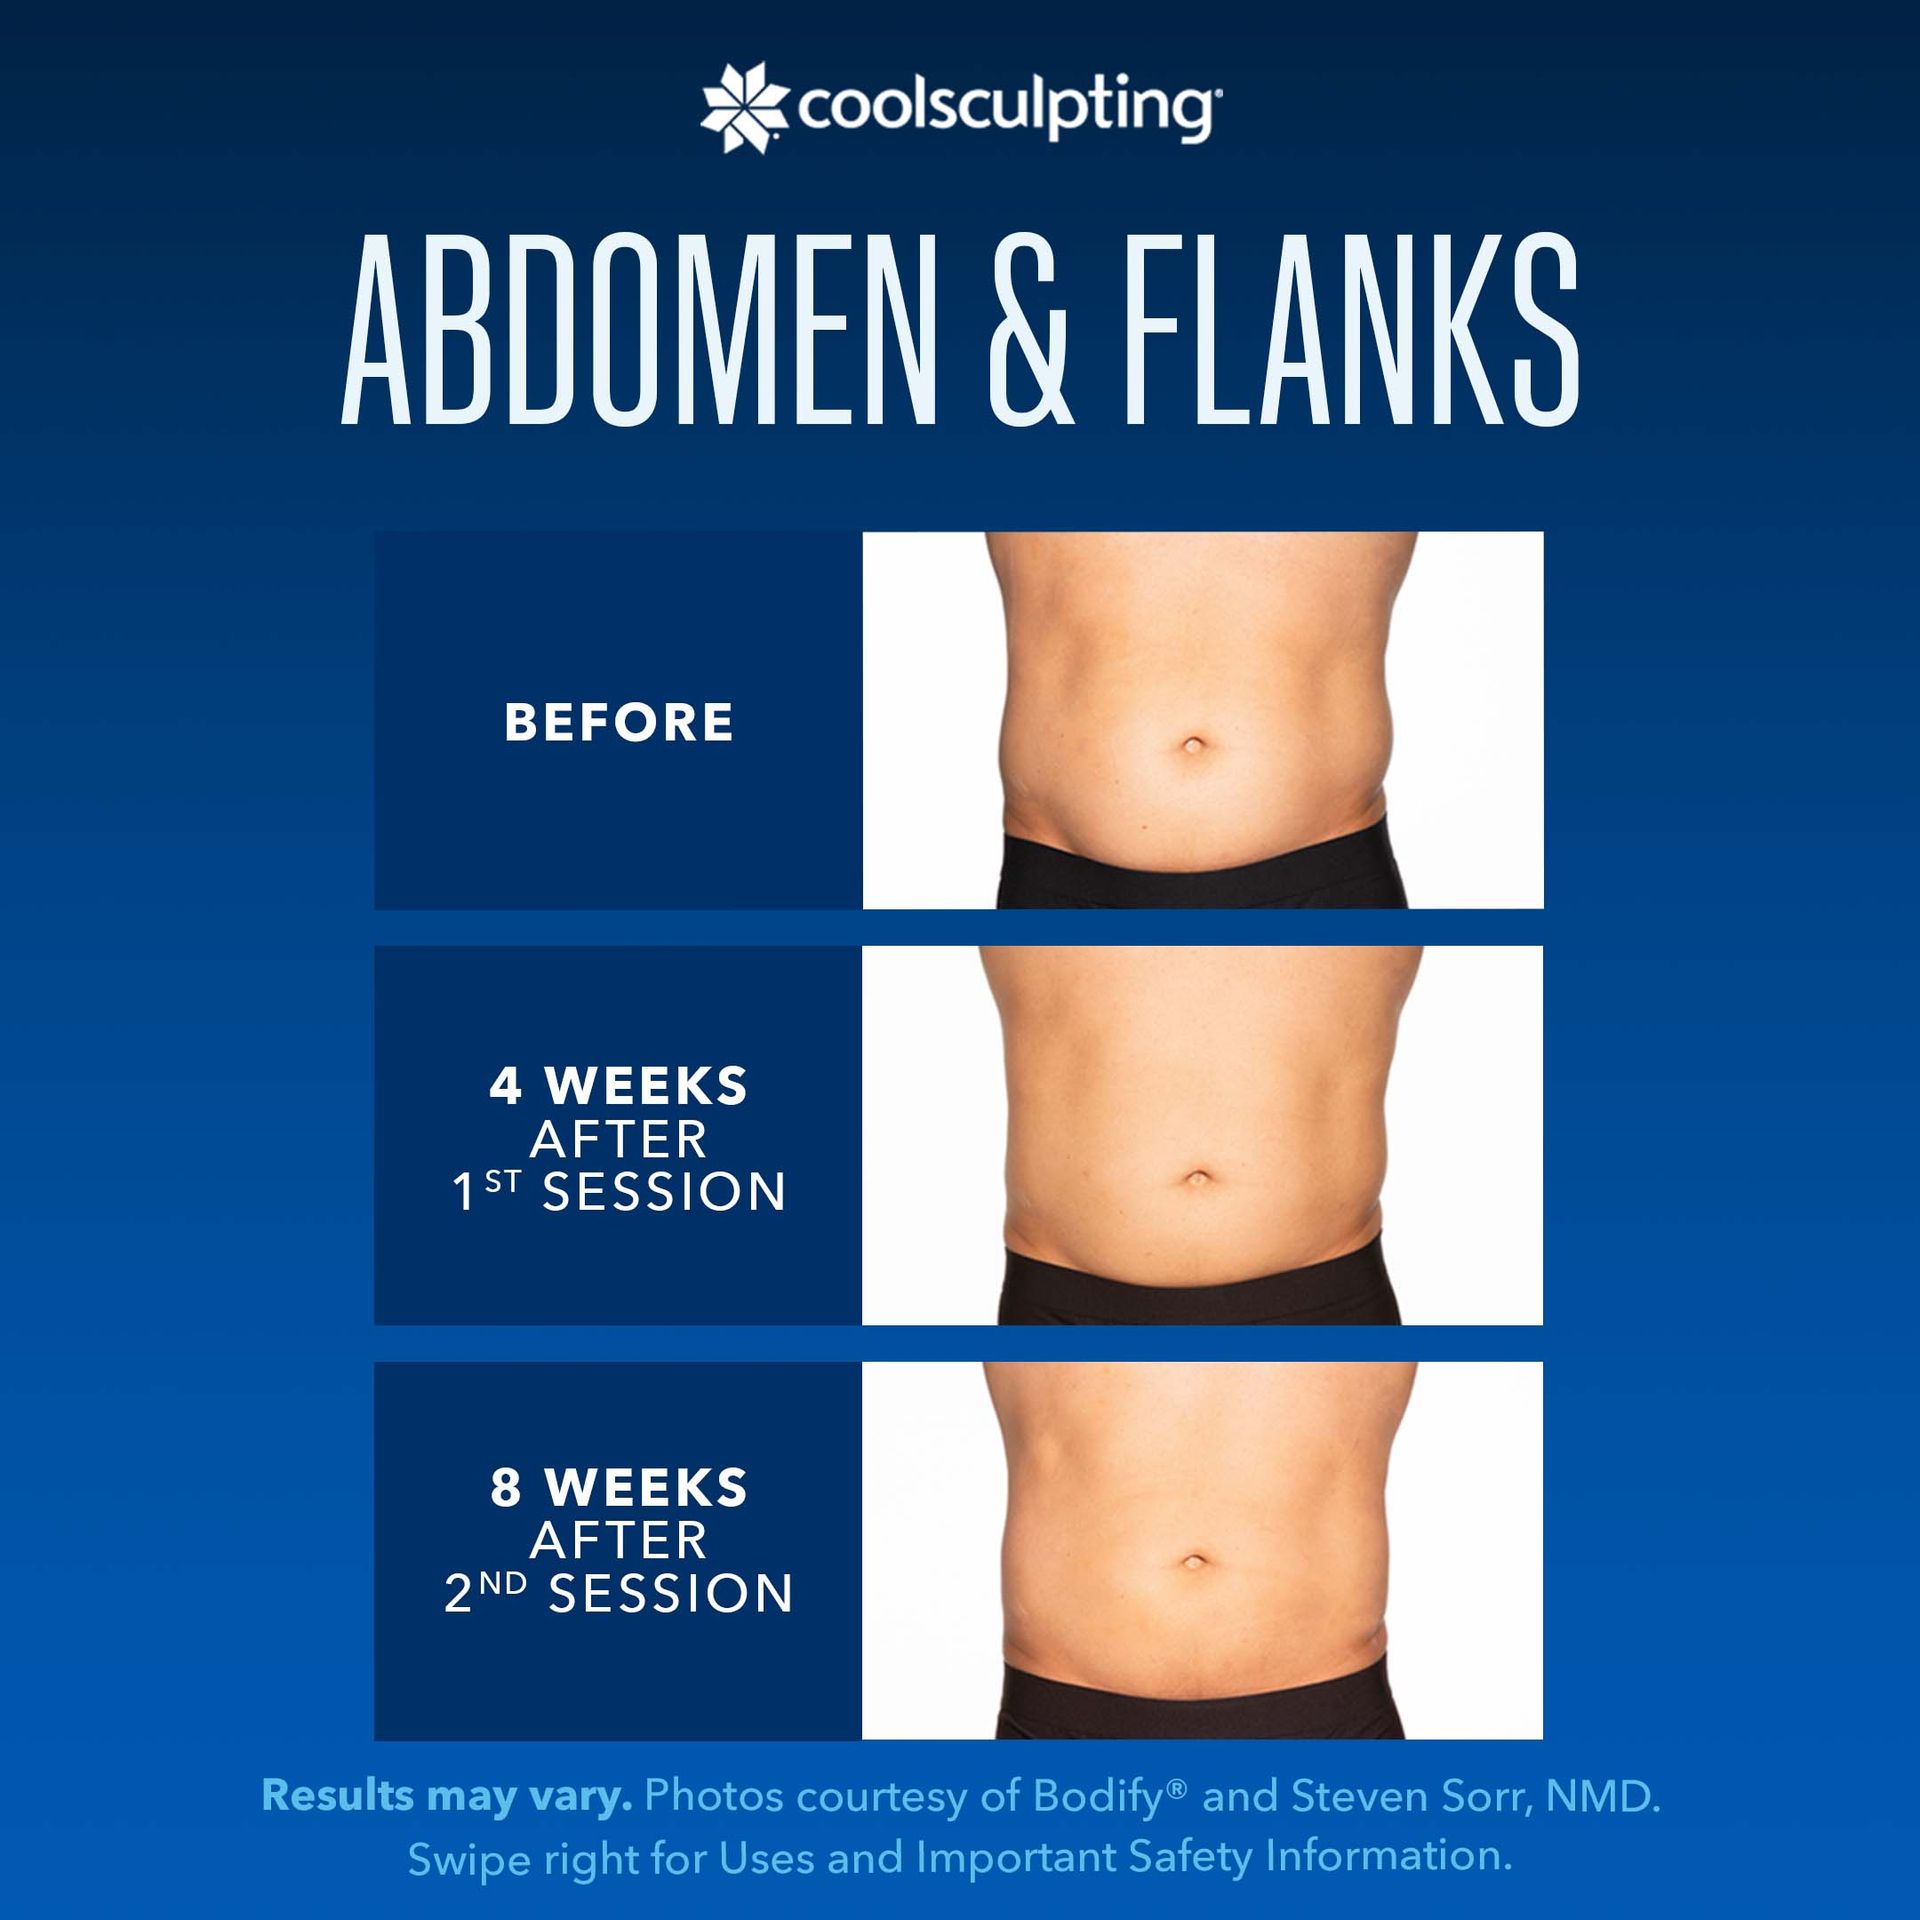 a before and after picture of a man's abdomen and flanks for coolsculpting treatment